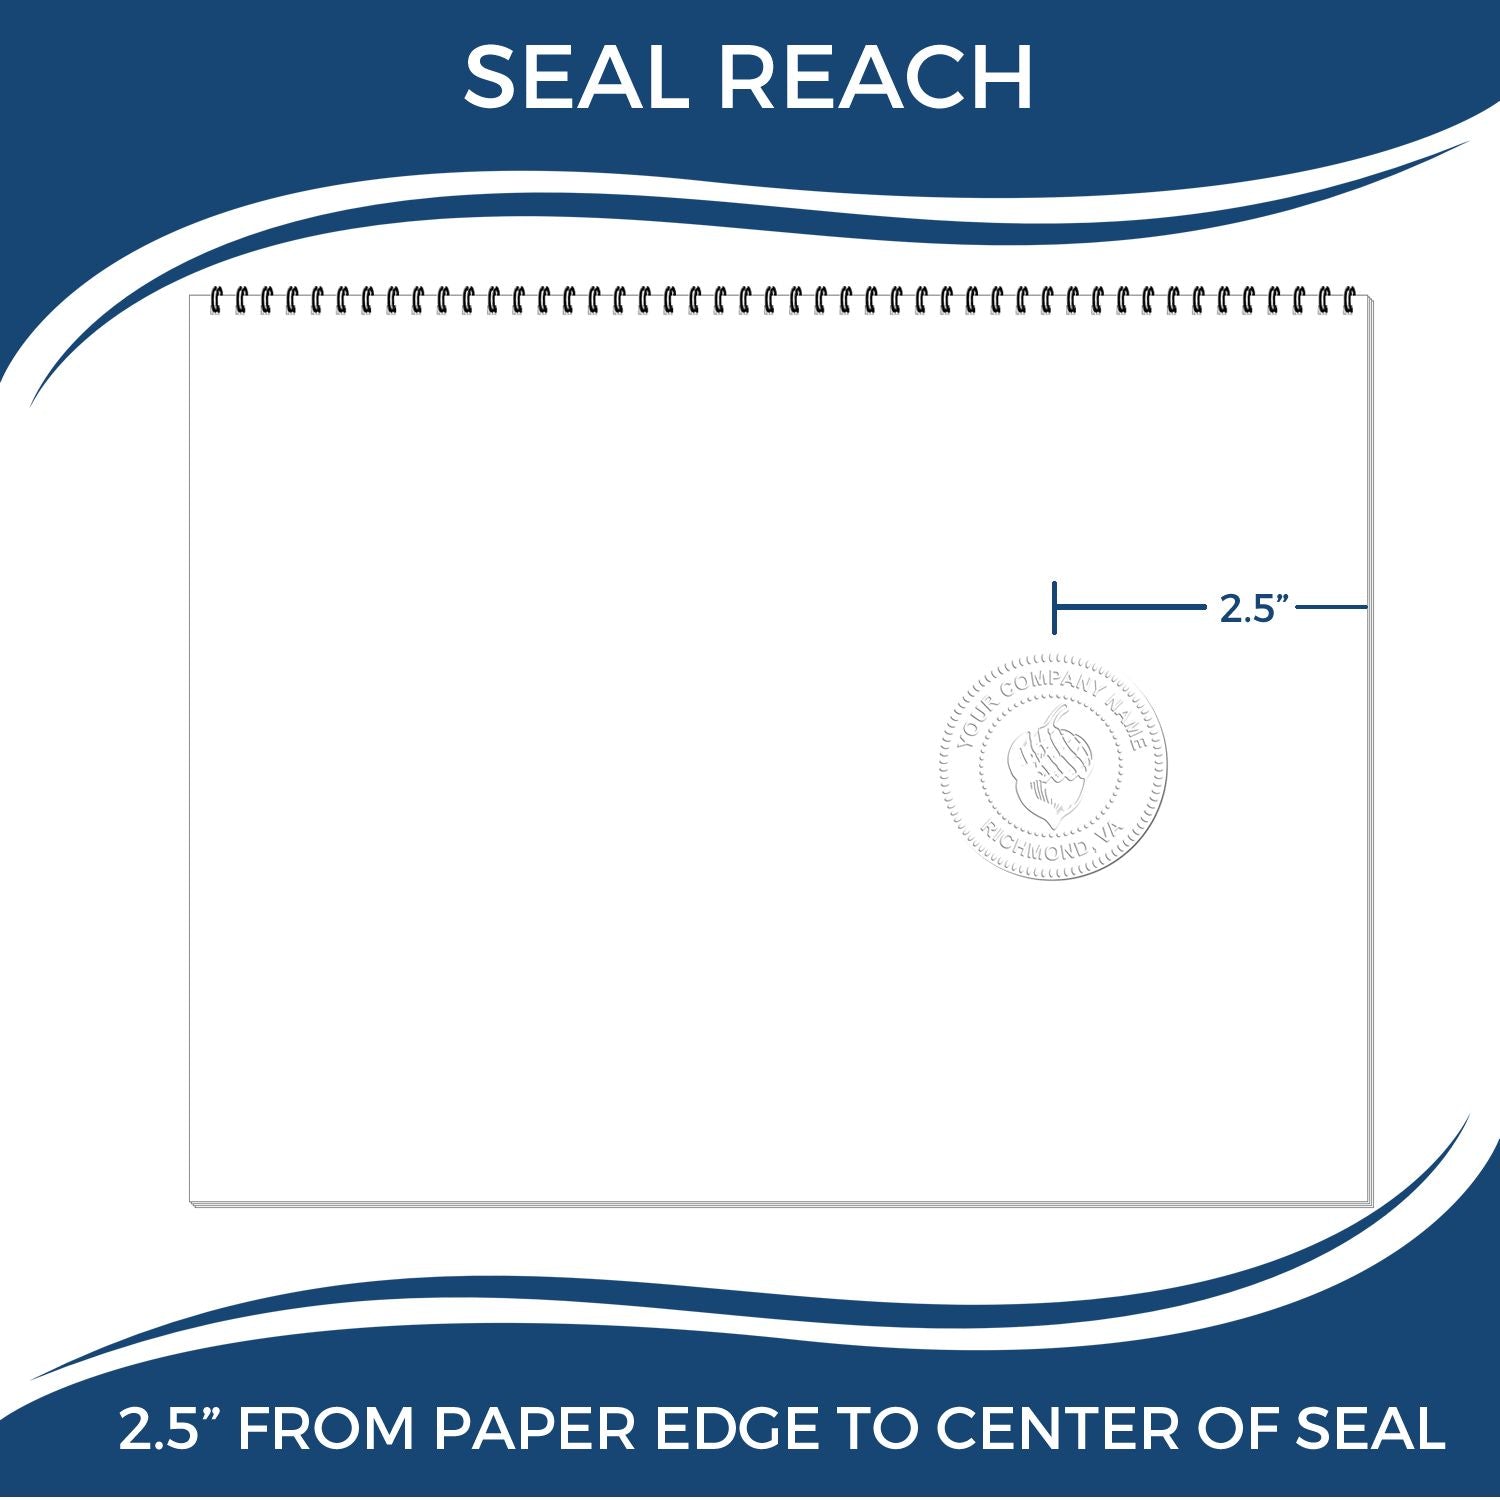 An infographic showing the seal reach which is represented by a ruler and a miniature seal image of the Heavy Duty Cast Iron Illinois Engineer Seal Embosser